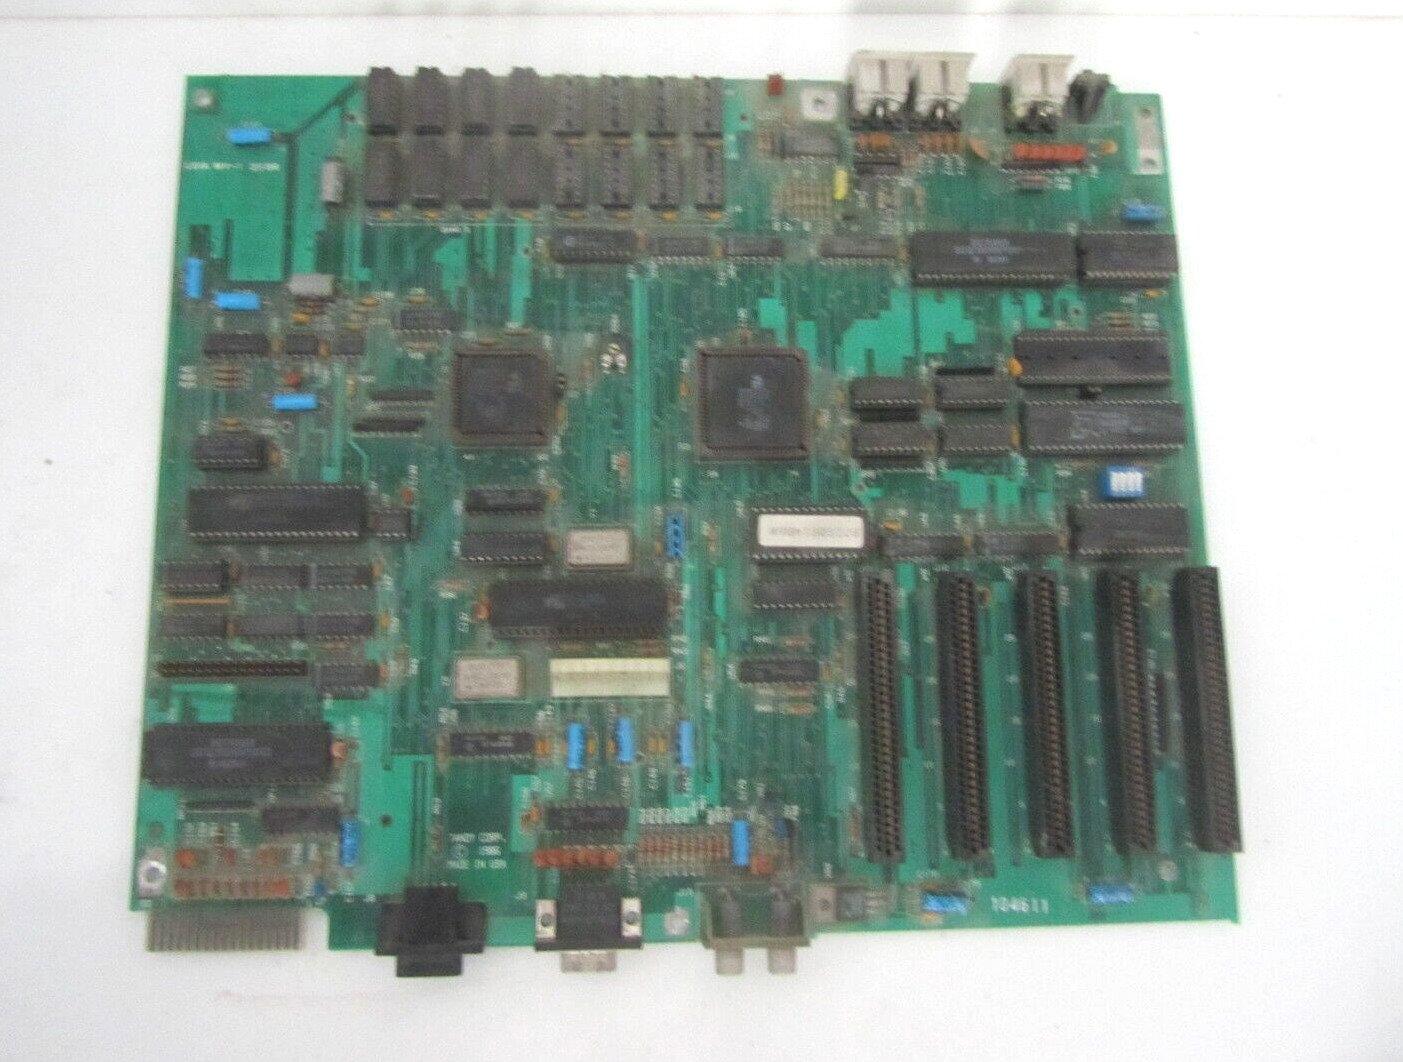 TANDY 1000sx Personal Computer Motherboard 8709699 1700337 REV A